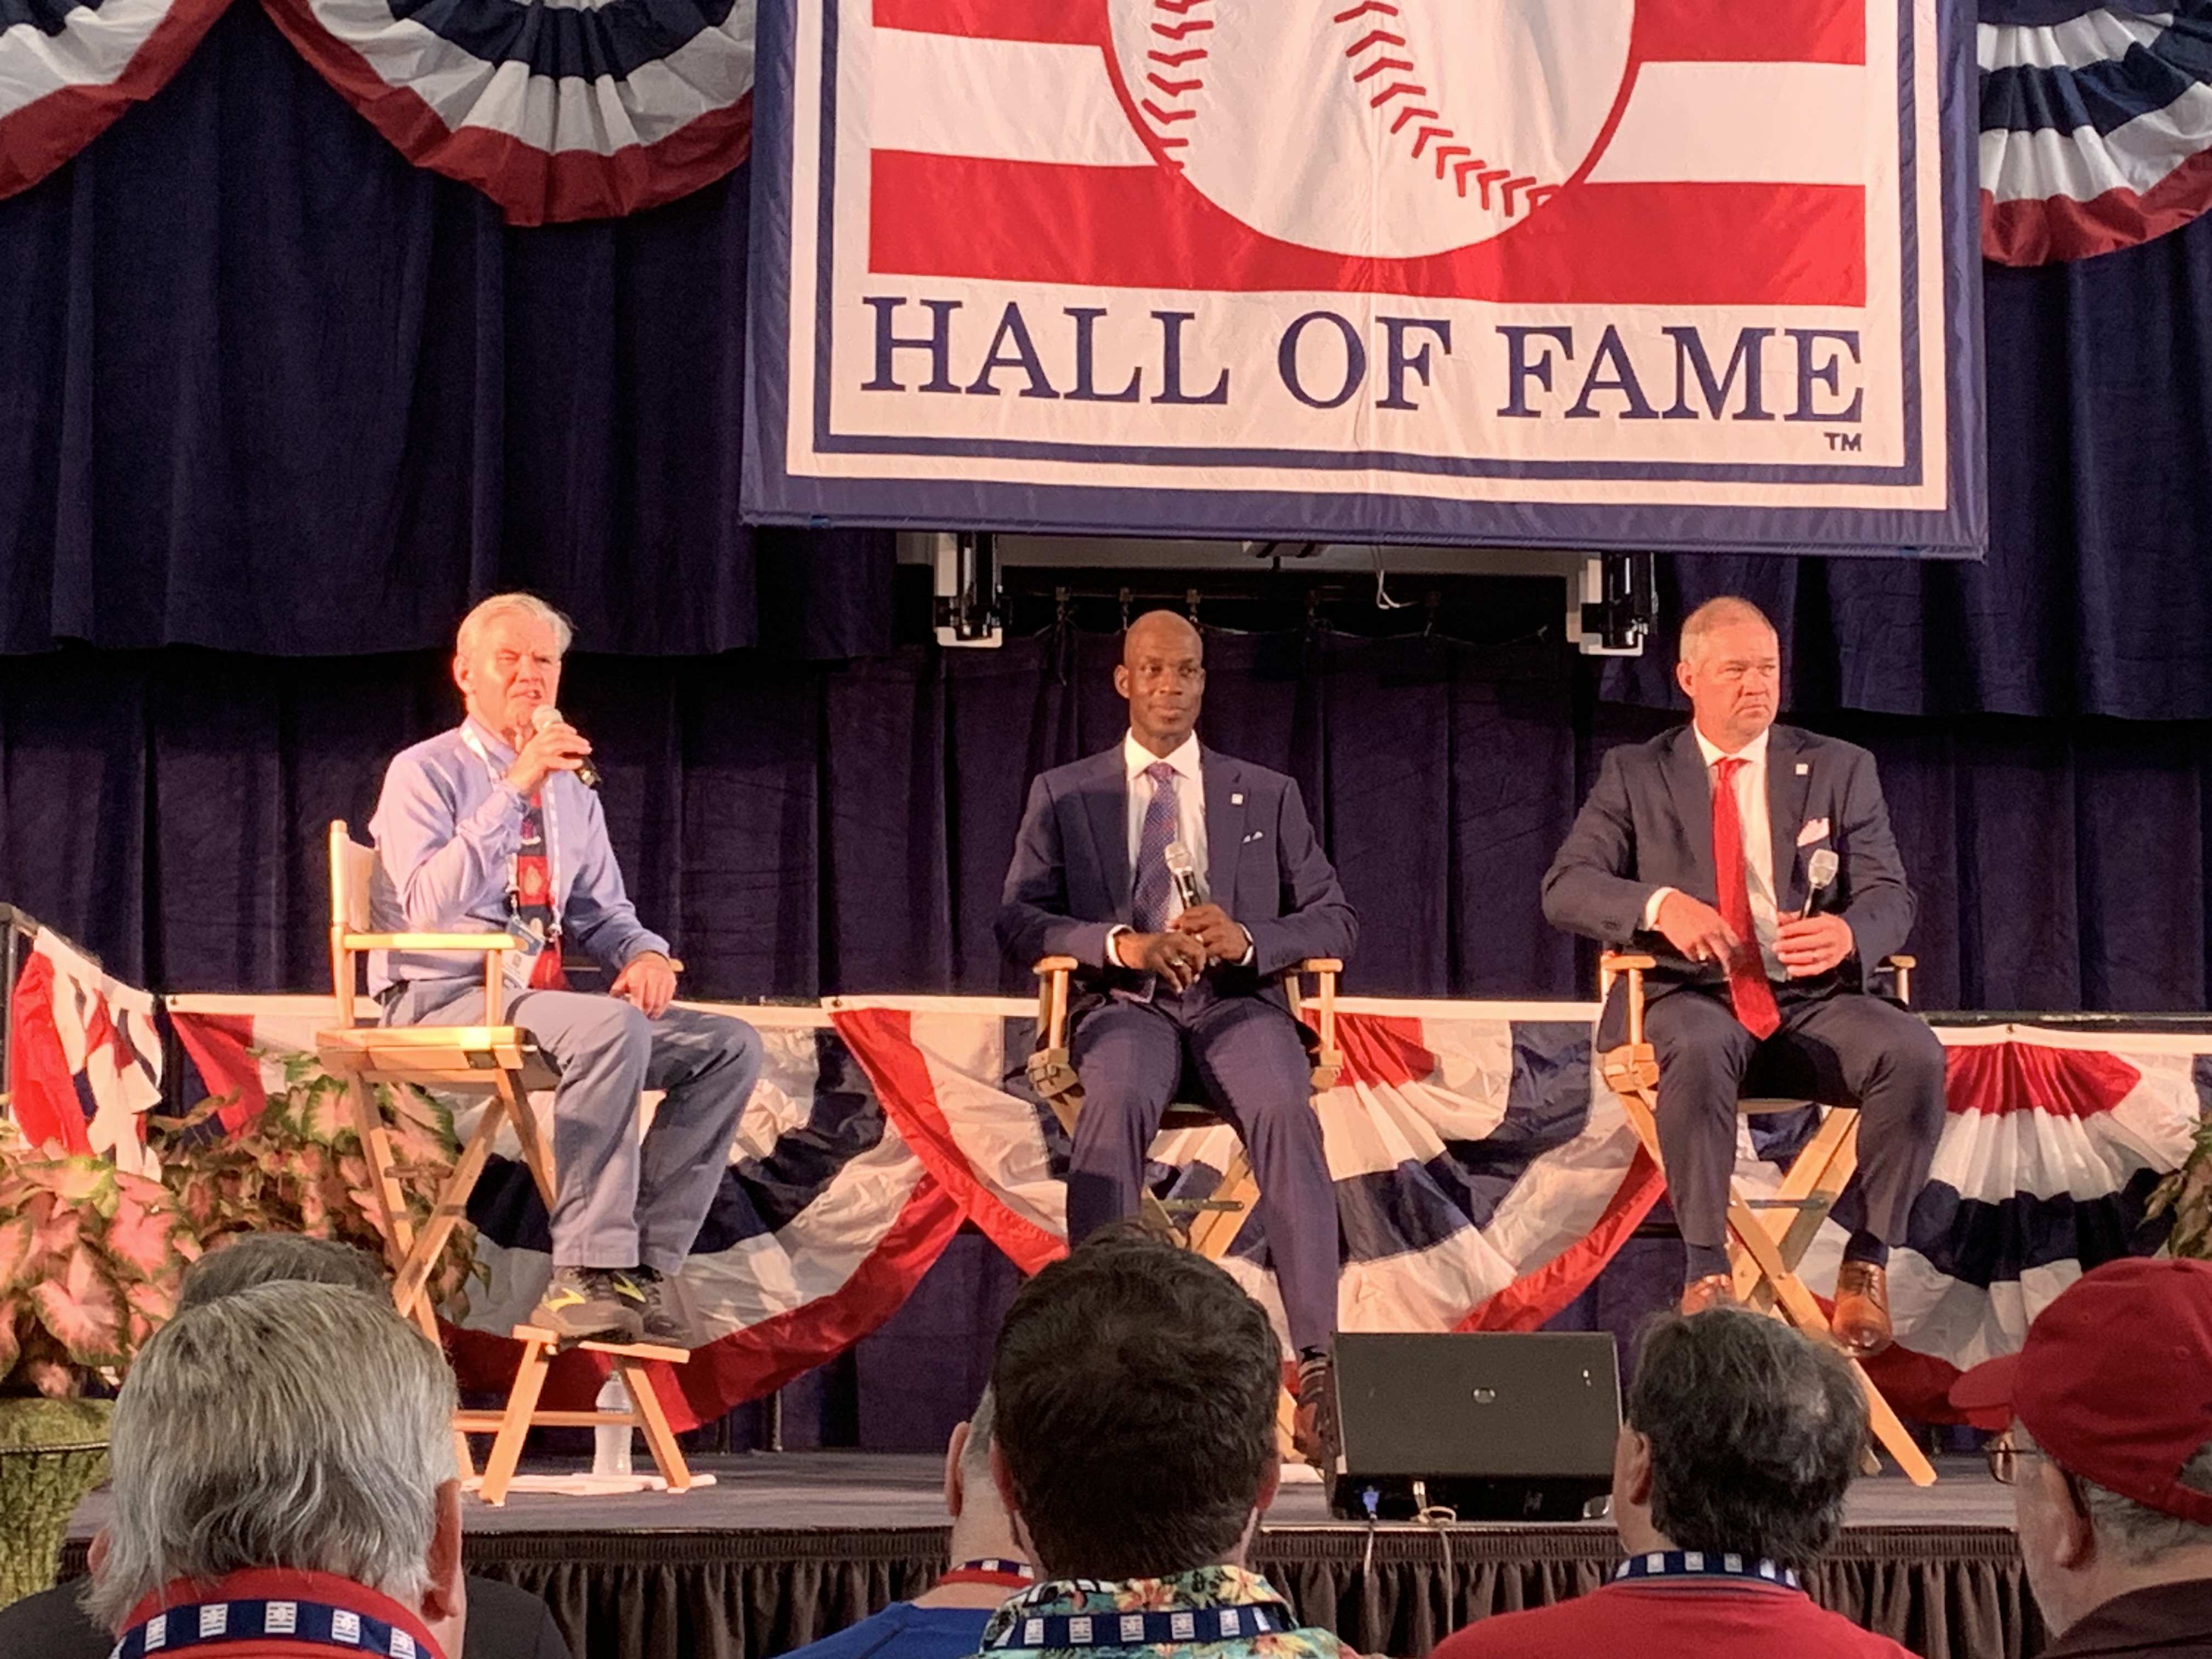 Fred McGriff's first visit to baseball Hall of Fame: special, humbling,  awesome